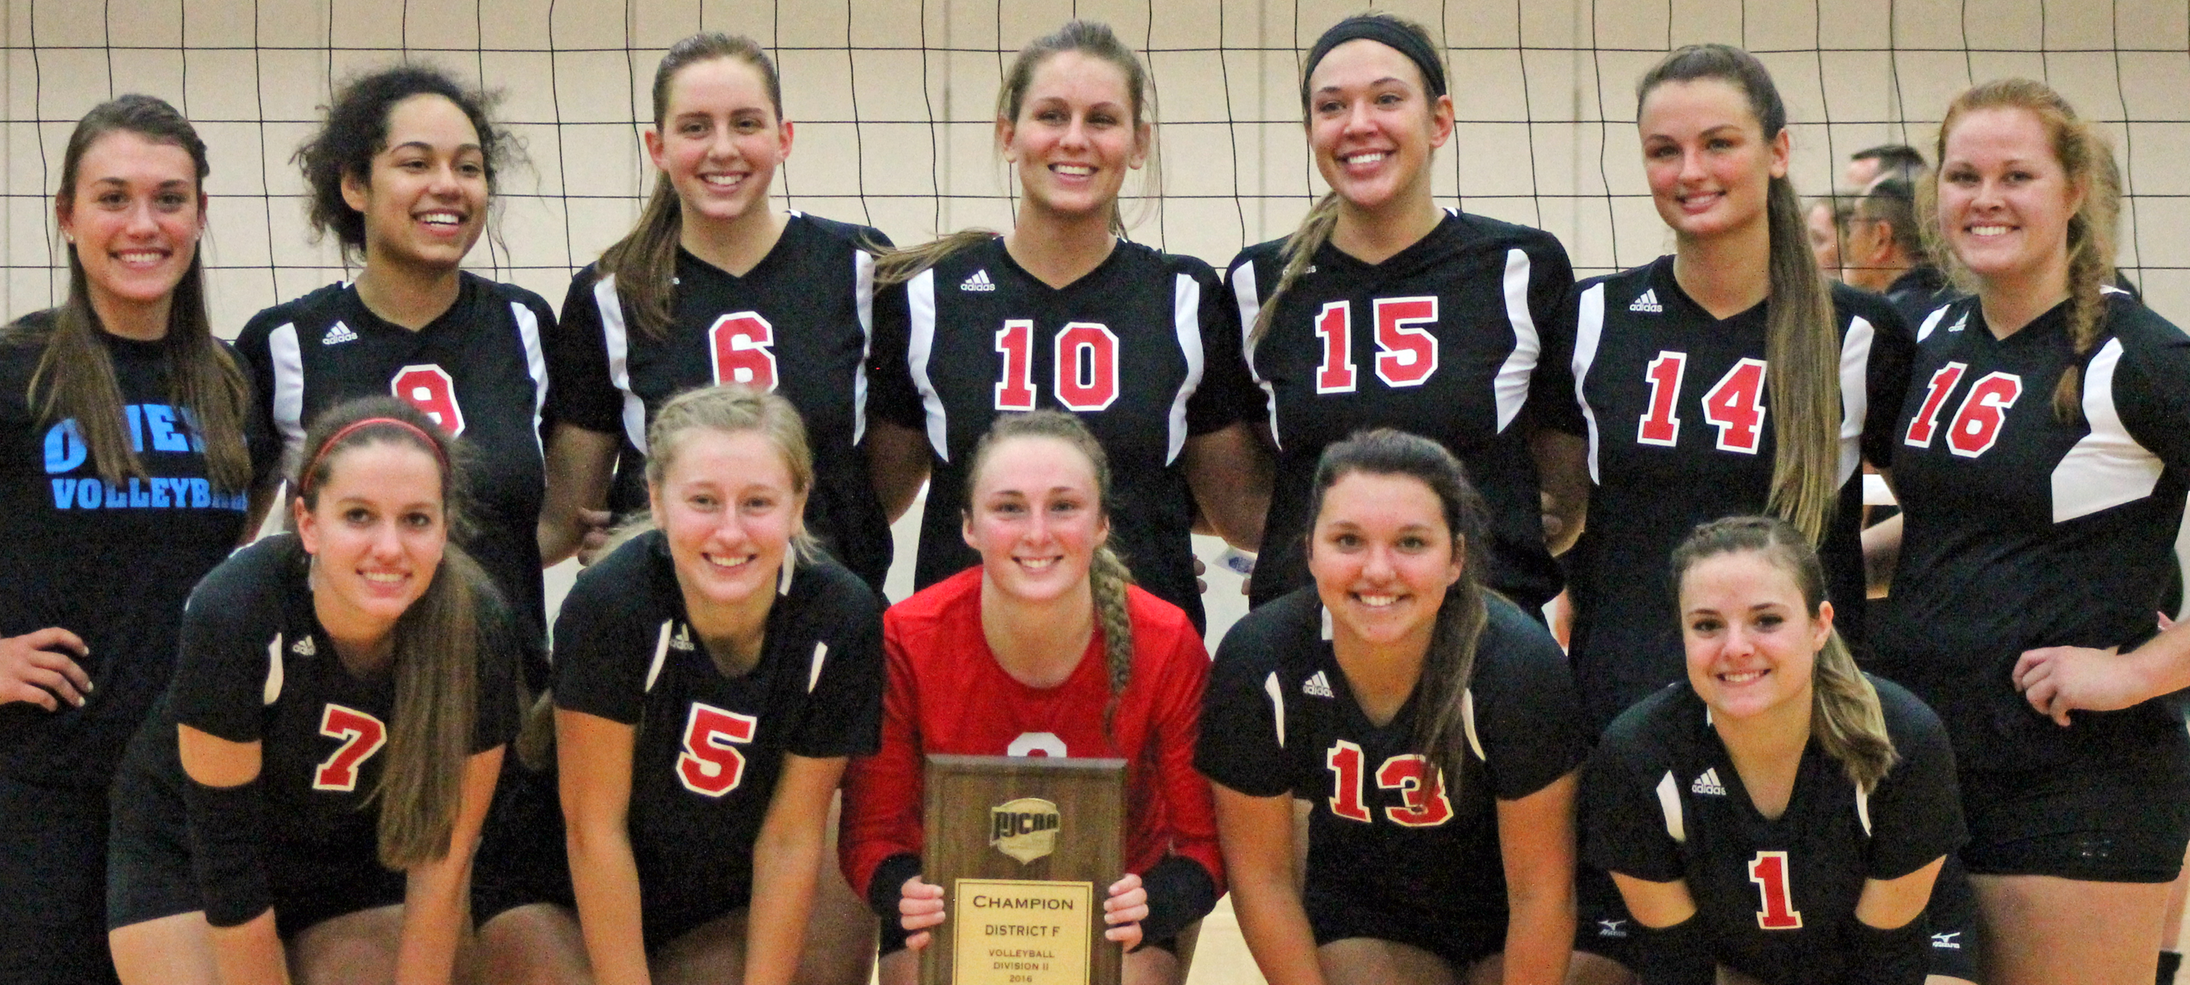 Team Effort Secures Second Straight District Championship For No. 2 Owens Volleyball